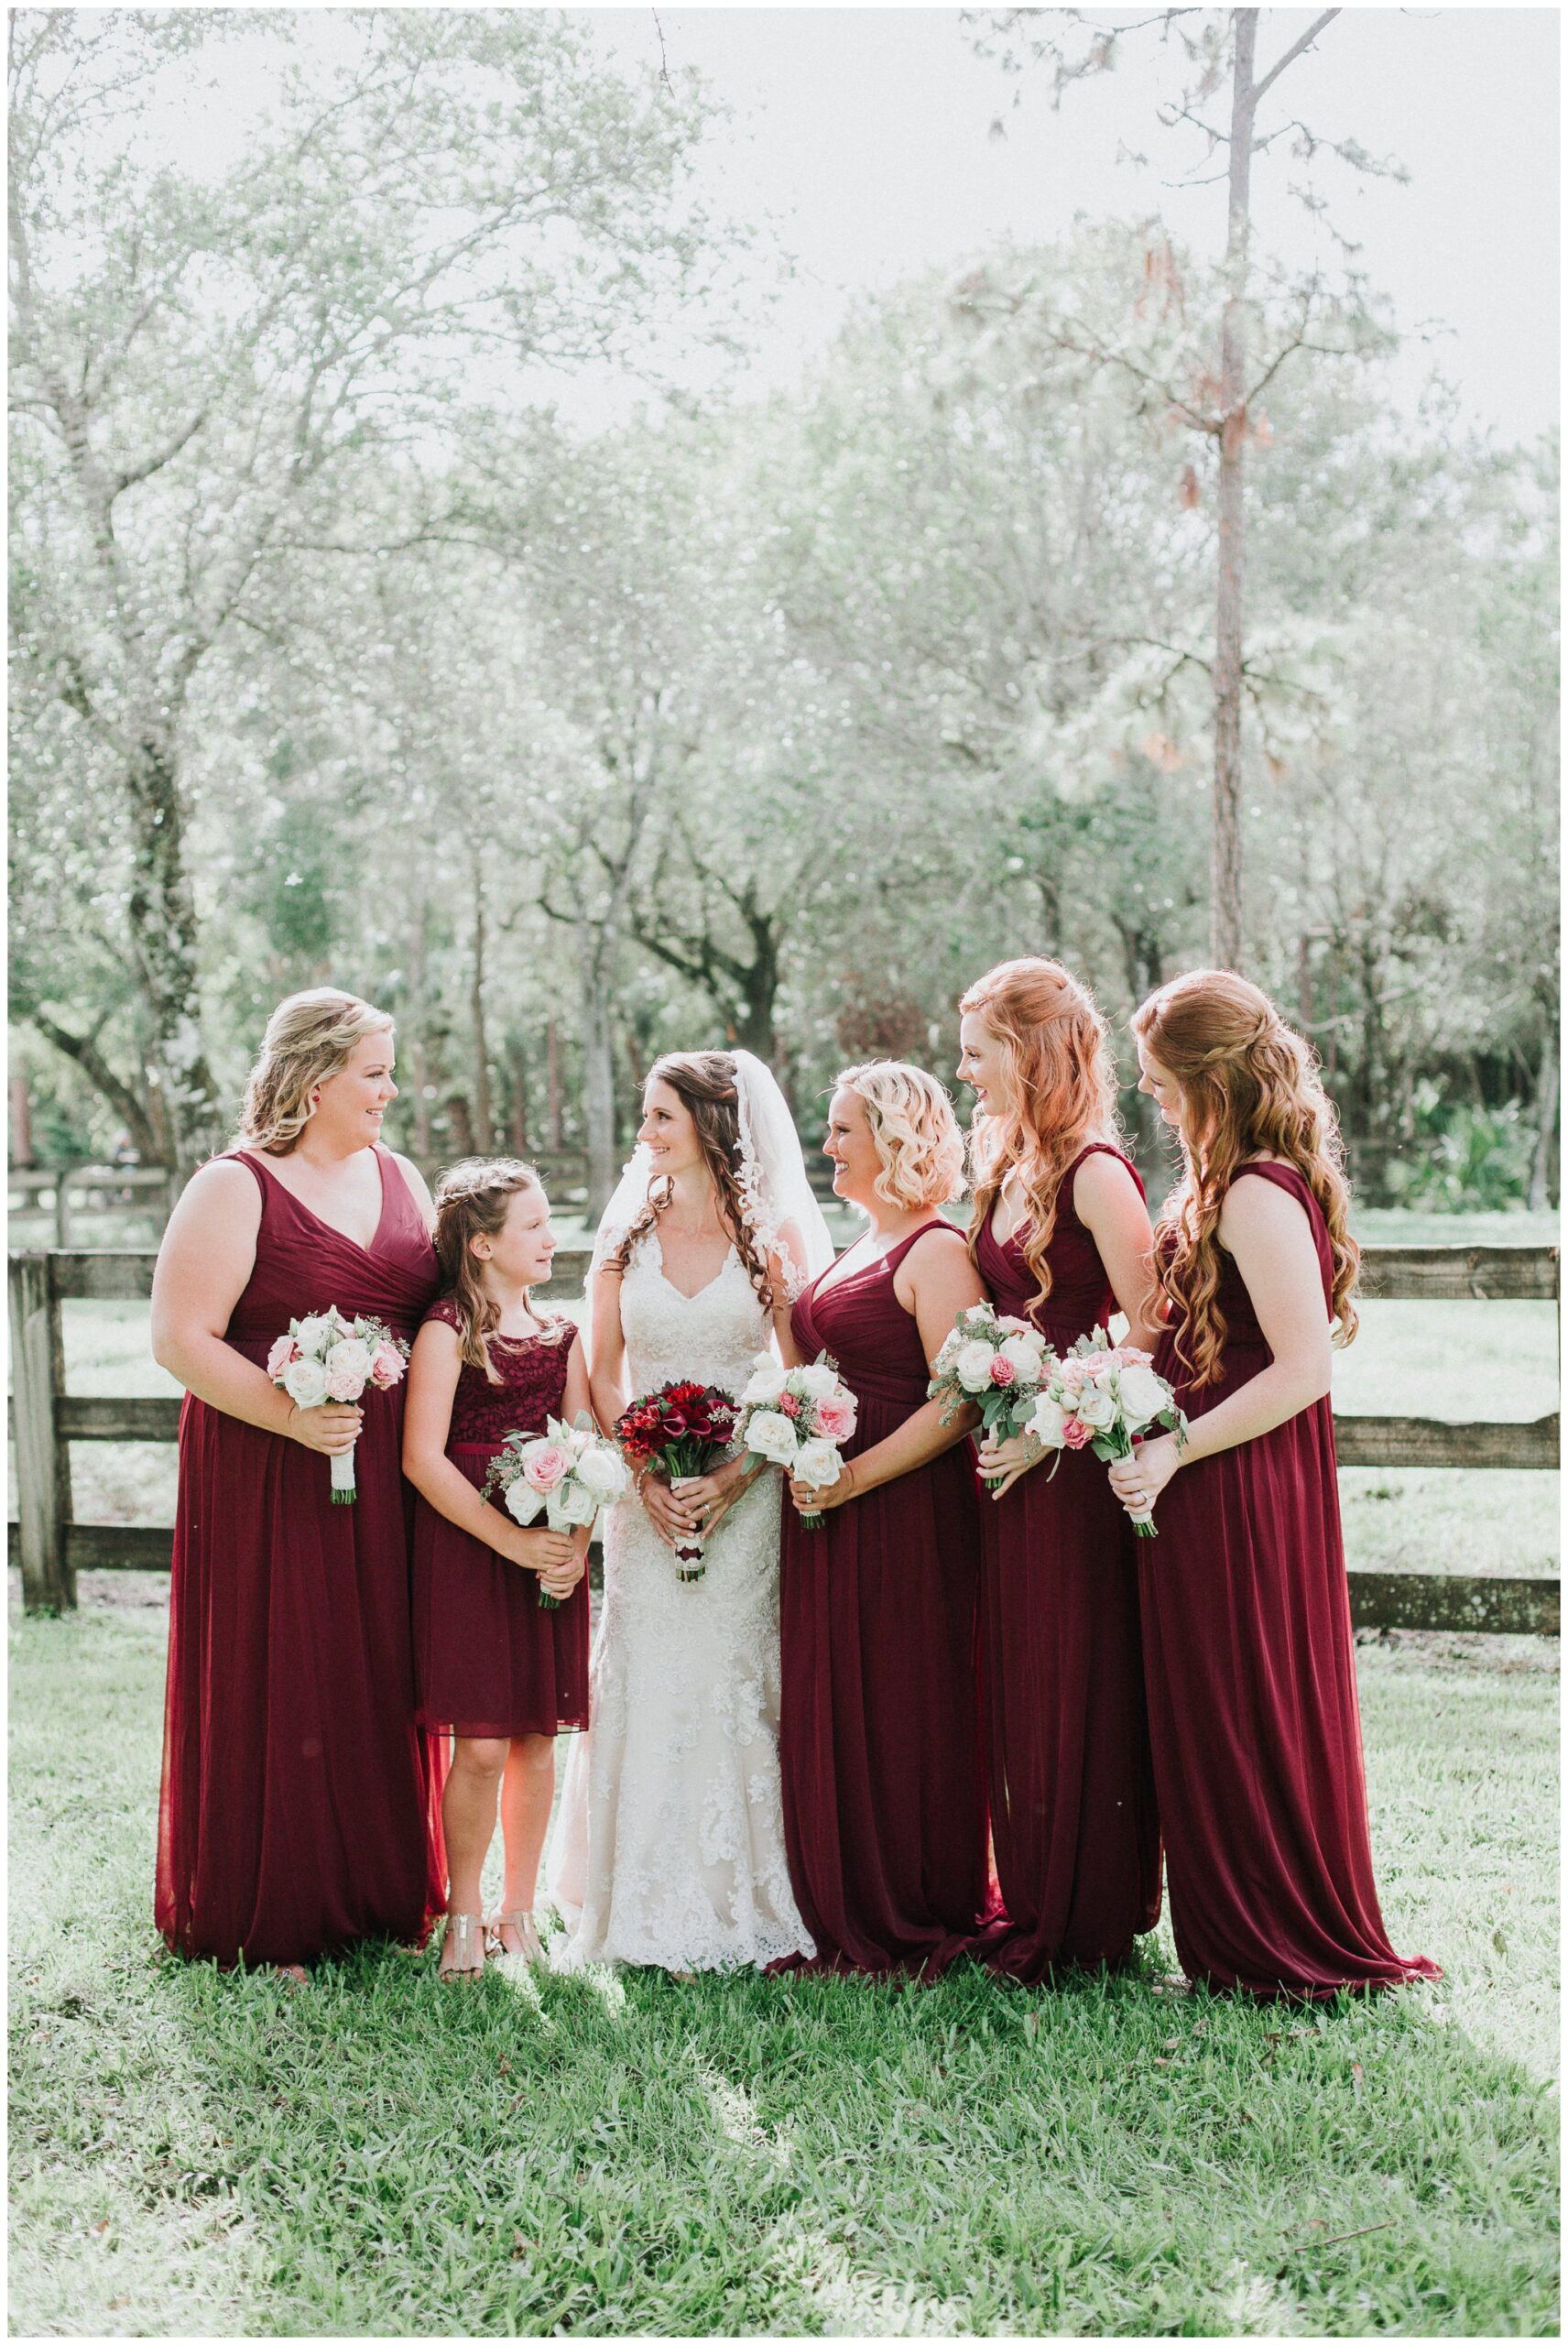 Even the burgundy bridesmaid's dresses were the perfect fall tones.&nbsp;